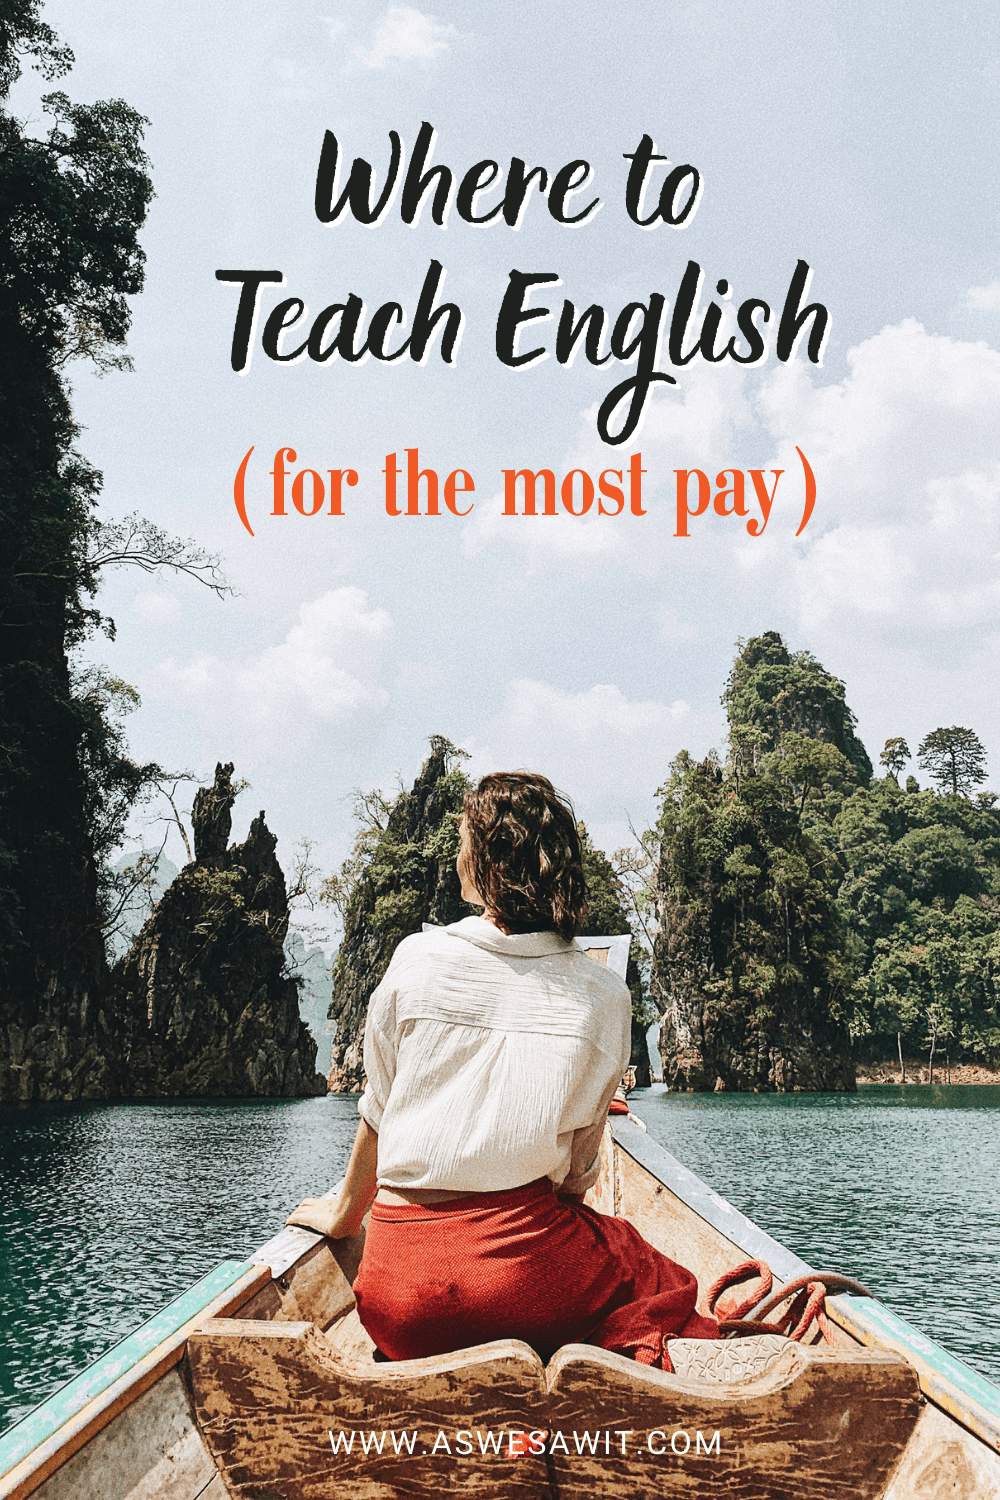 Woman in a canoe overseas. Text overlay says "Where to Teach English for the most pay"